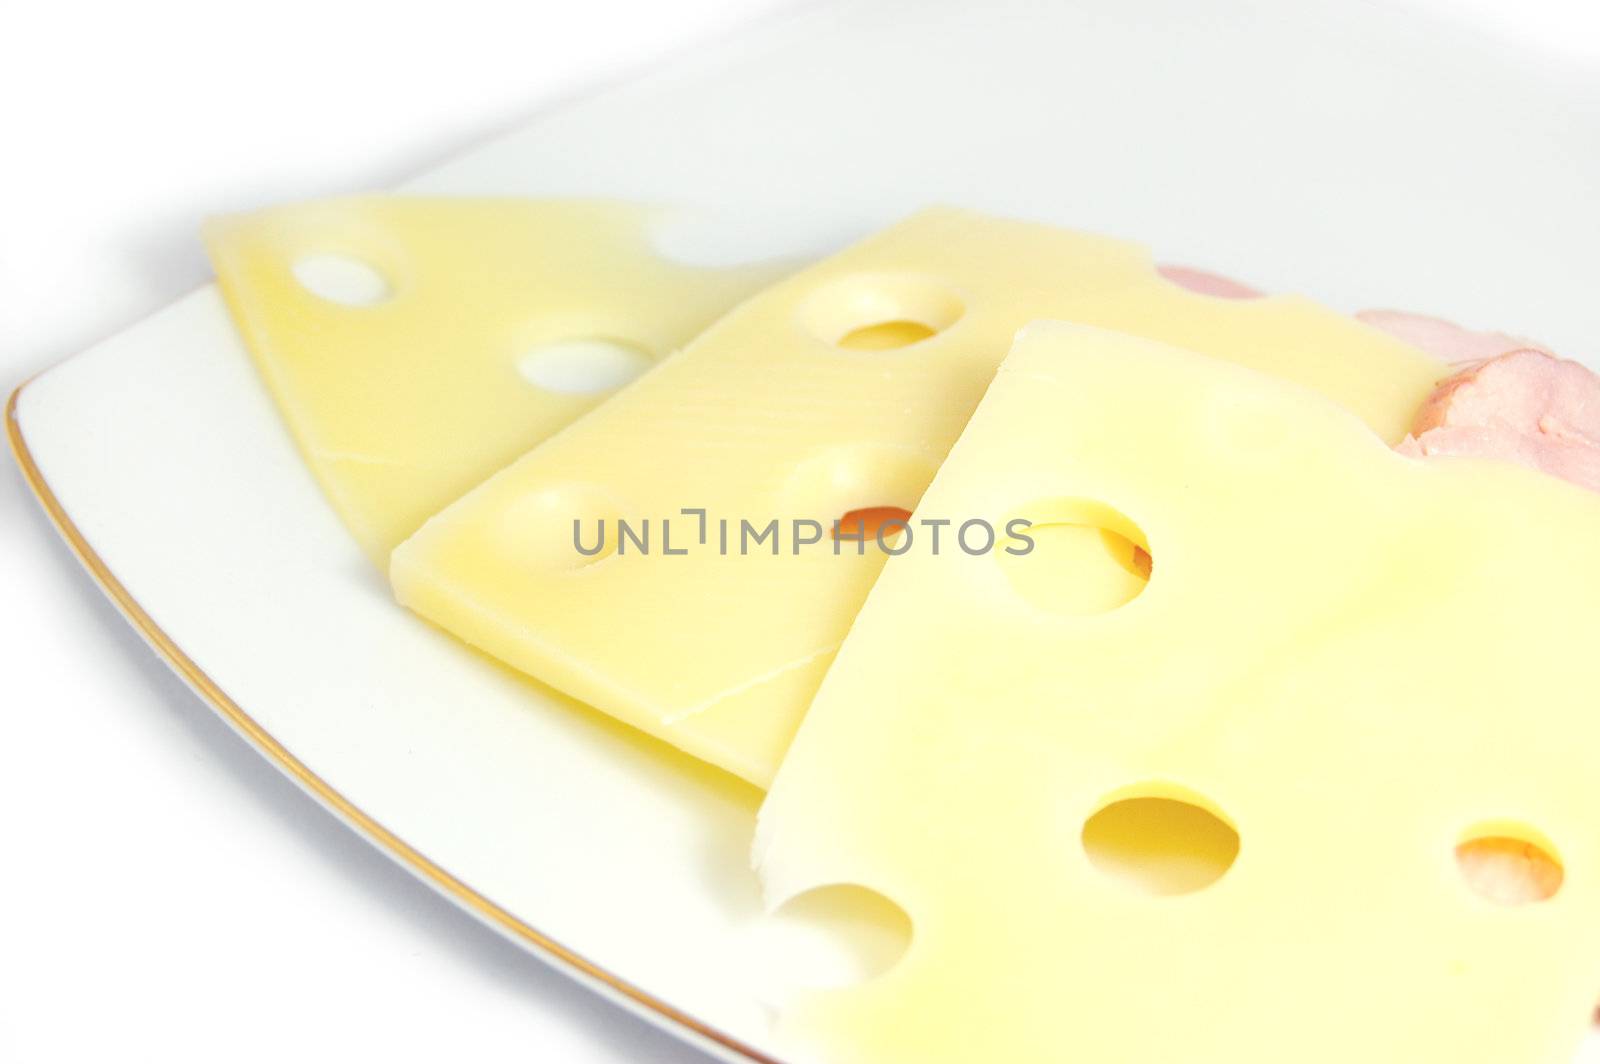 Slices of cheese with holes on plate over white